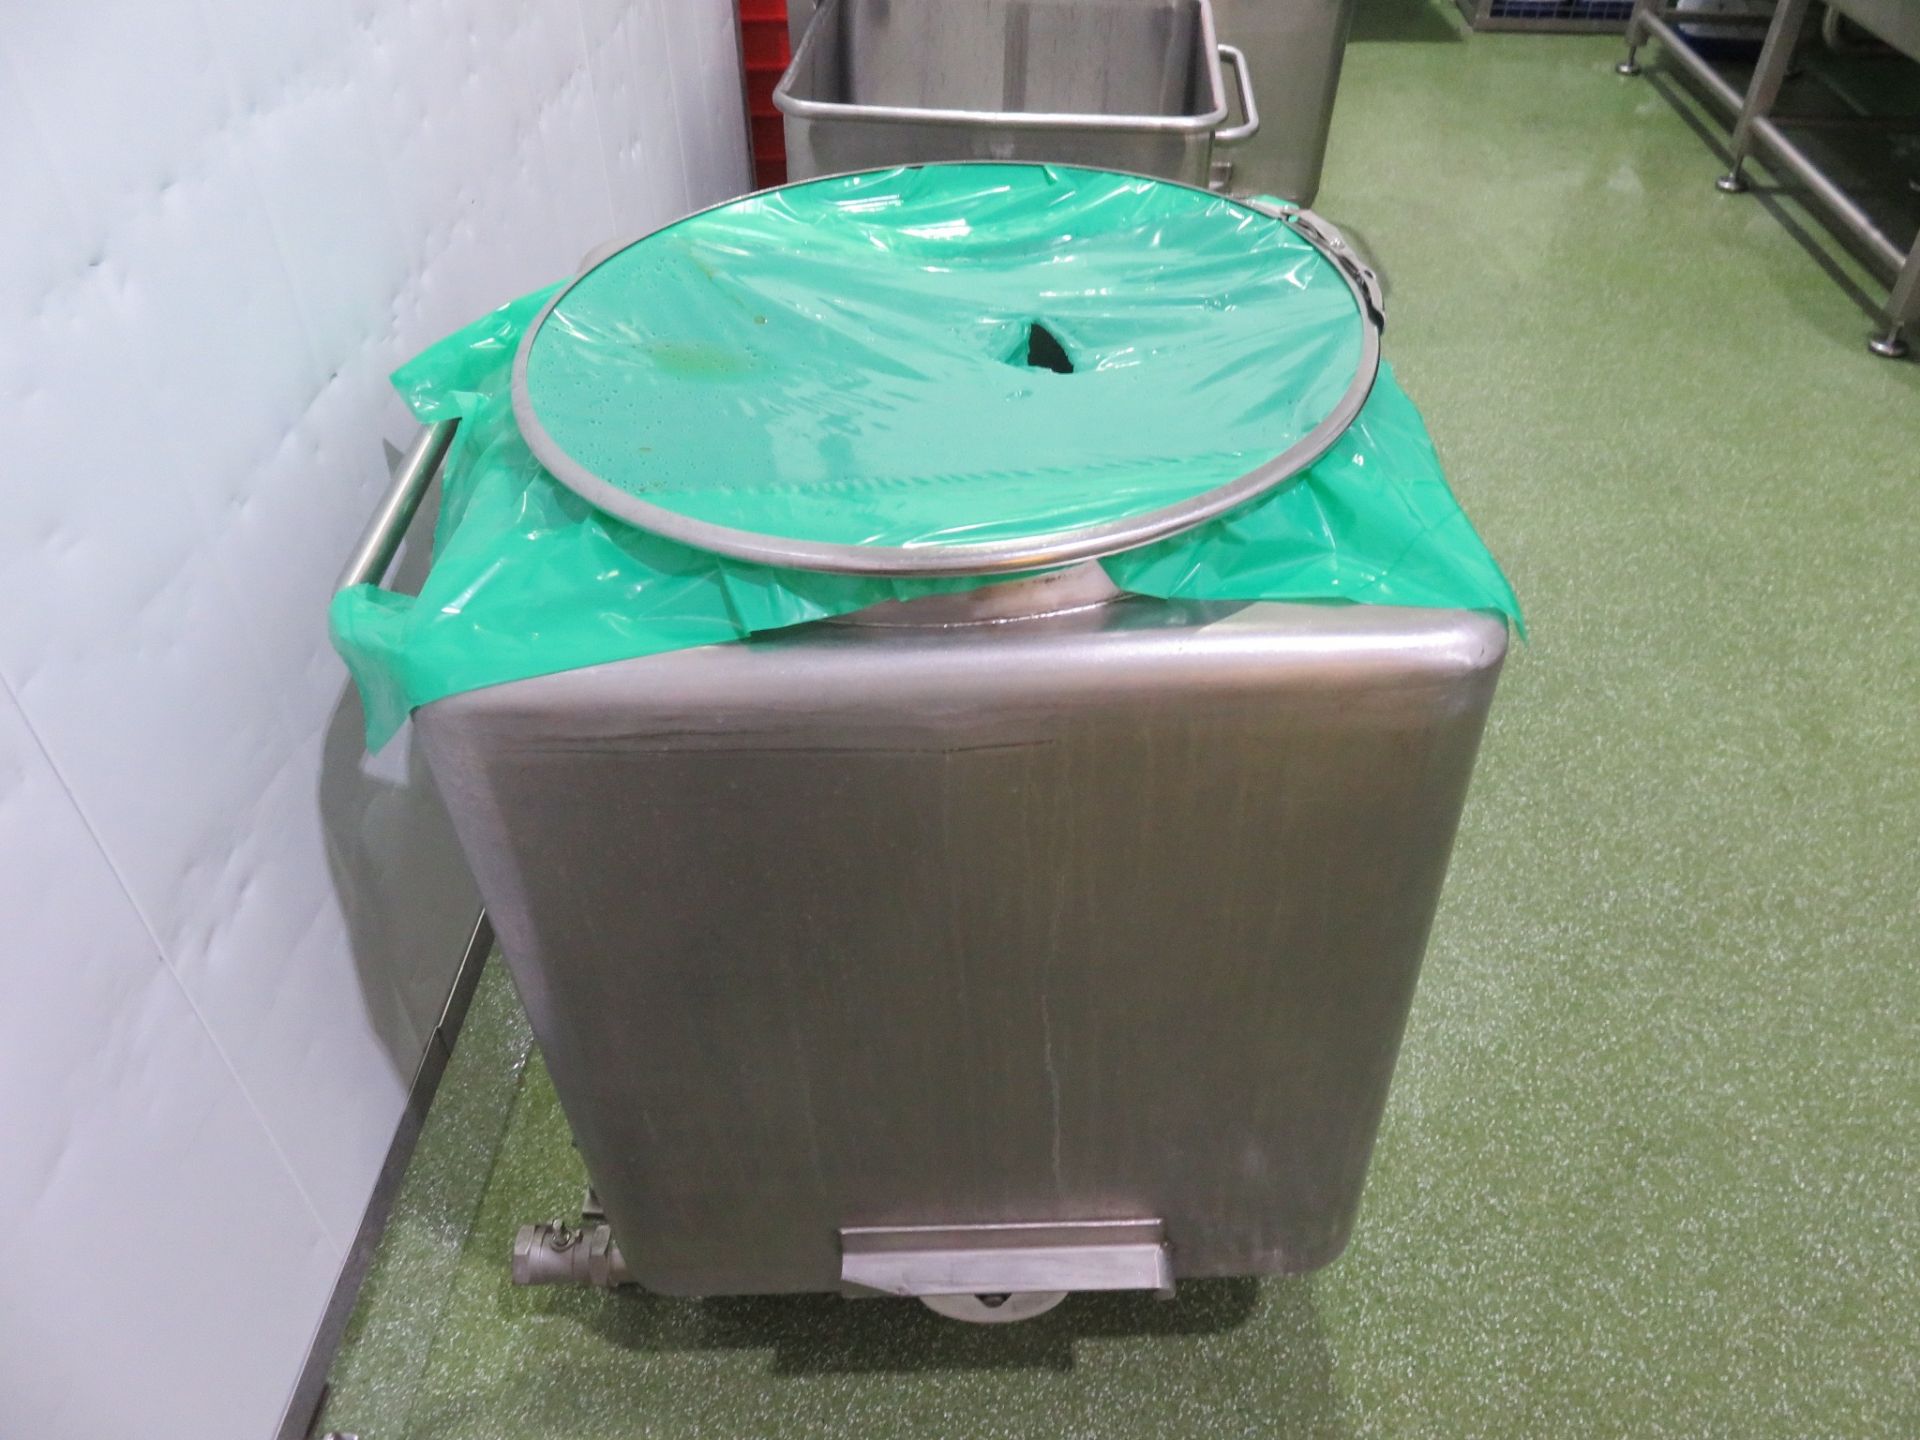 2 x S/s Mobile liquid bins with bottom side discharge. Approx. 600 x 600 x 880mm high. Lift out £20